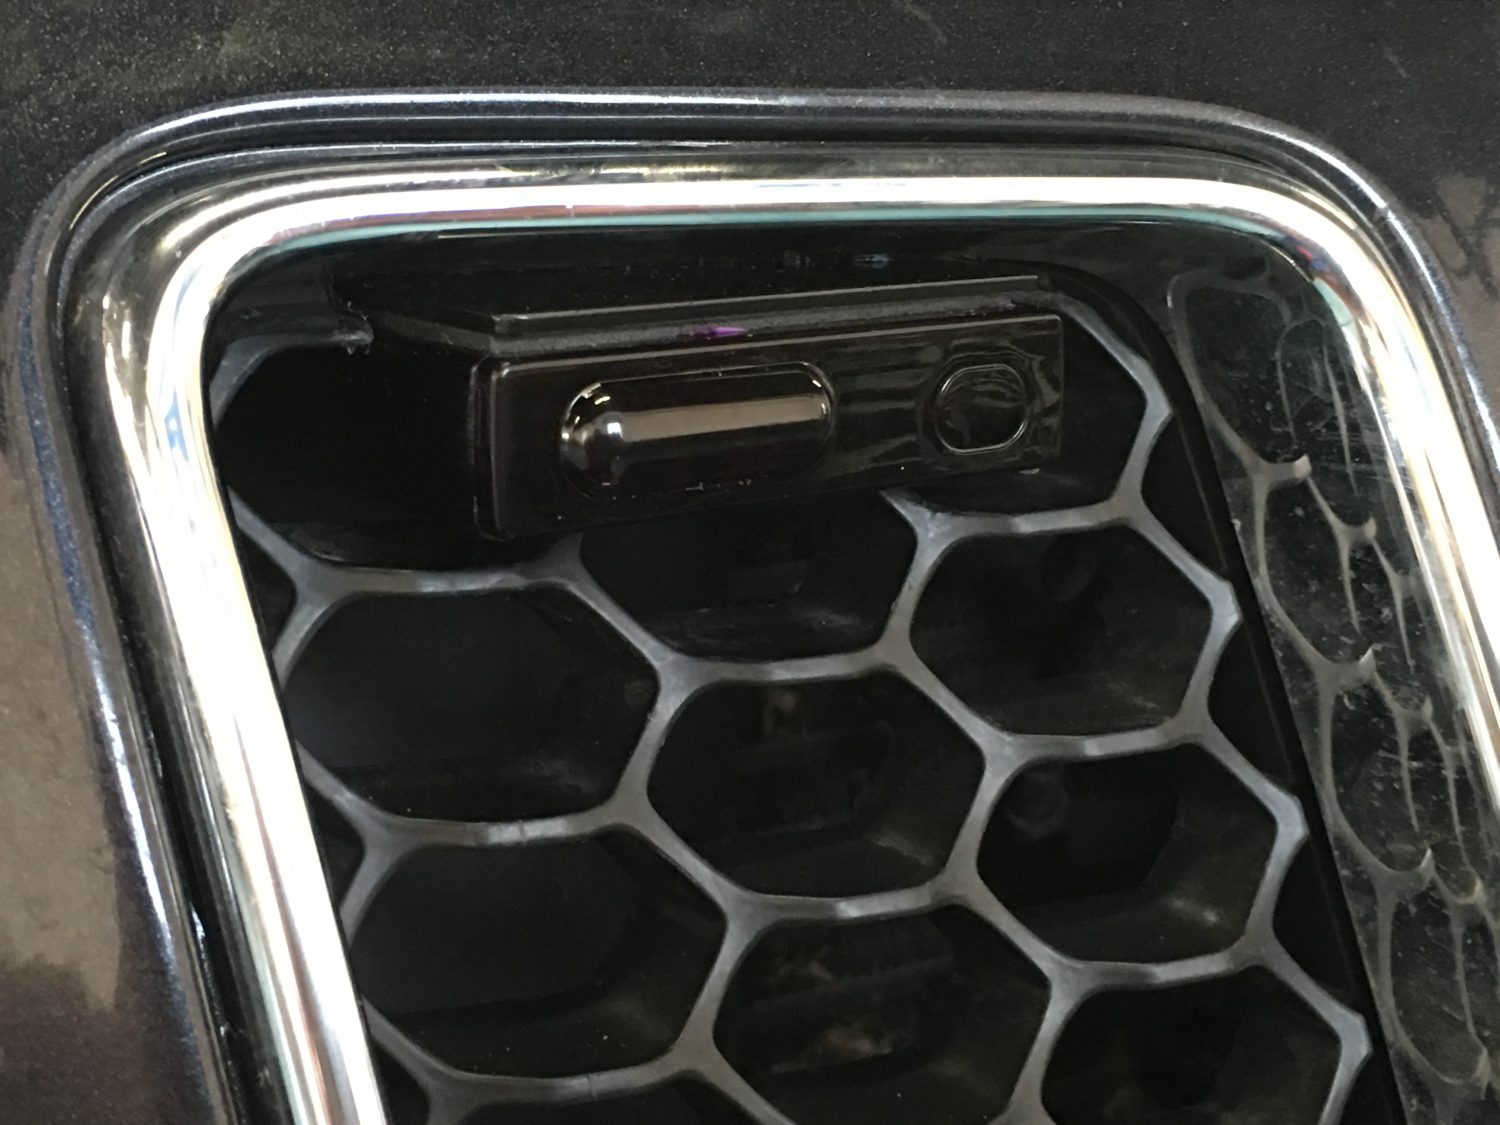 k40 laser jammers on a 2015 Jeep Grand Cherokee